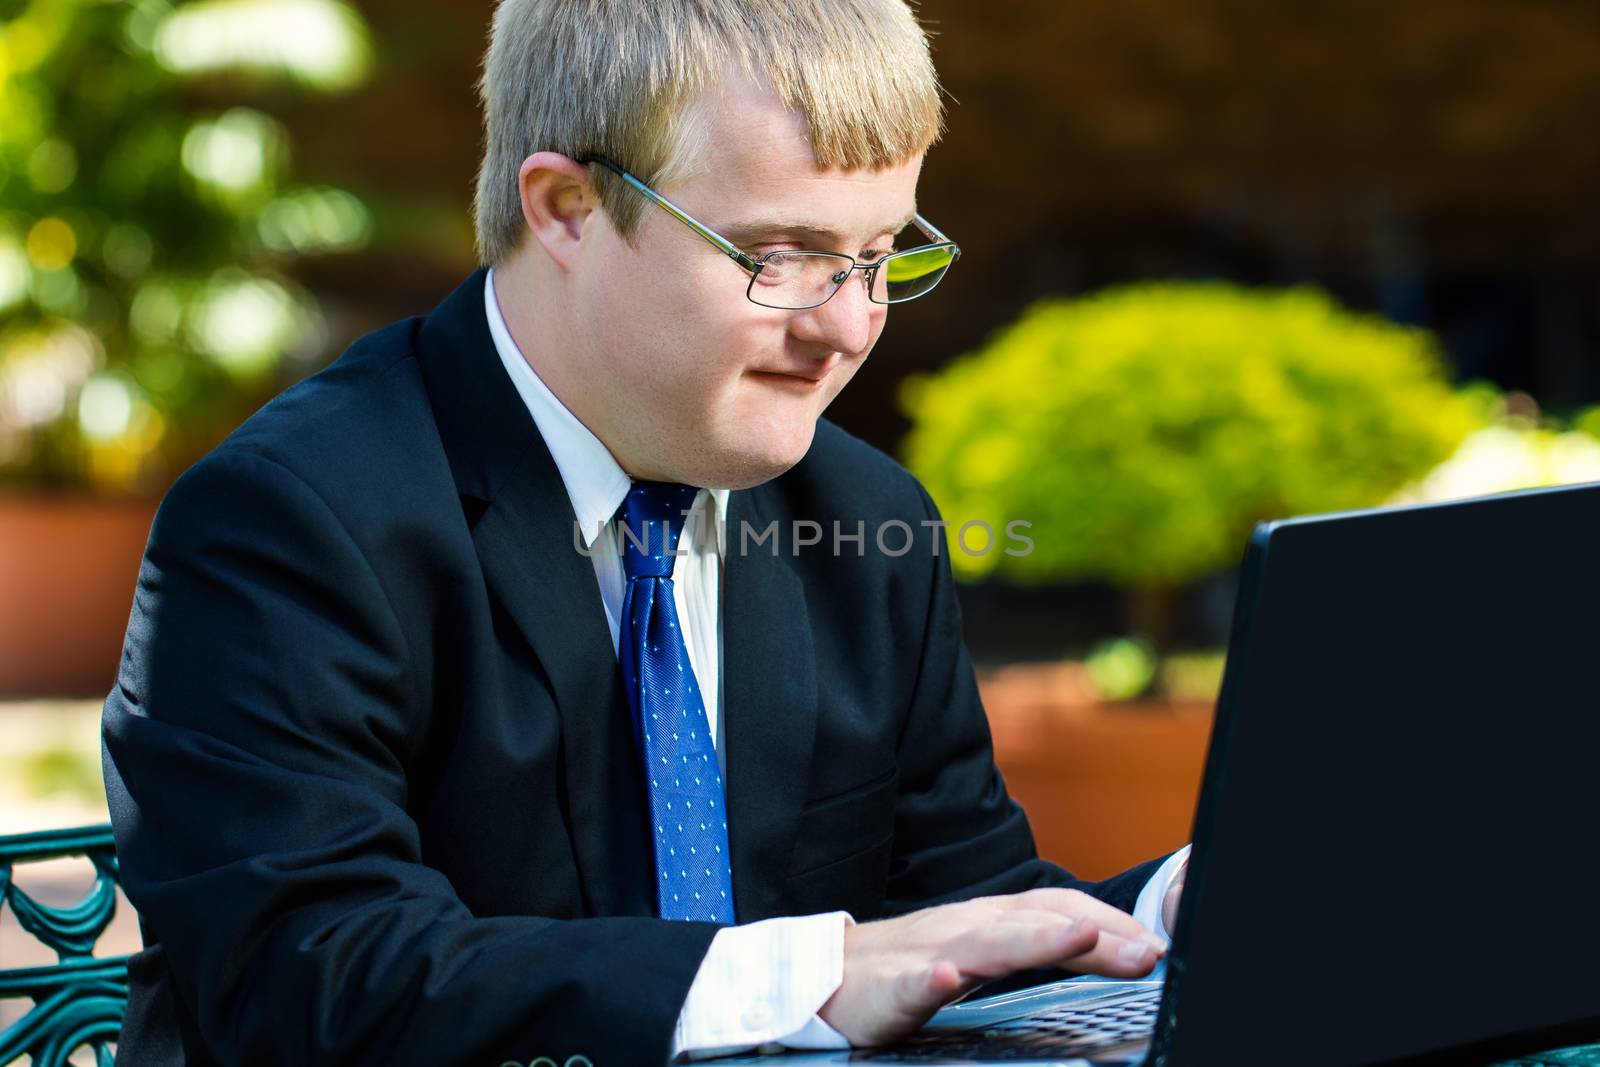 Close up portrait of businessman with down syndrome working. Young man in suit working on laptop in garden.